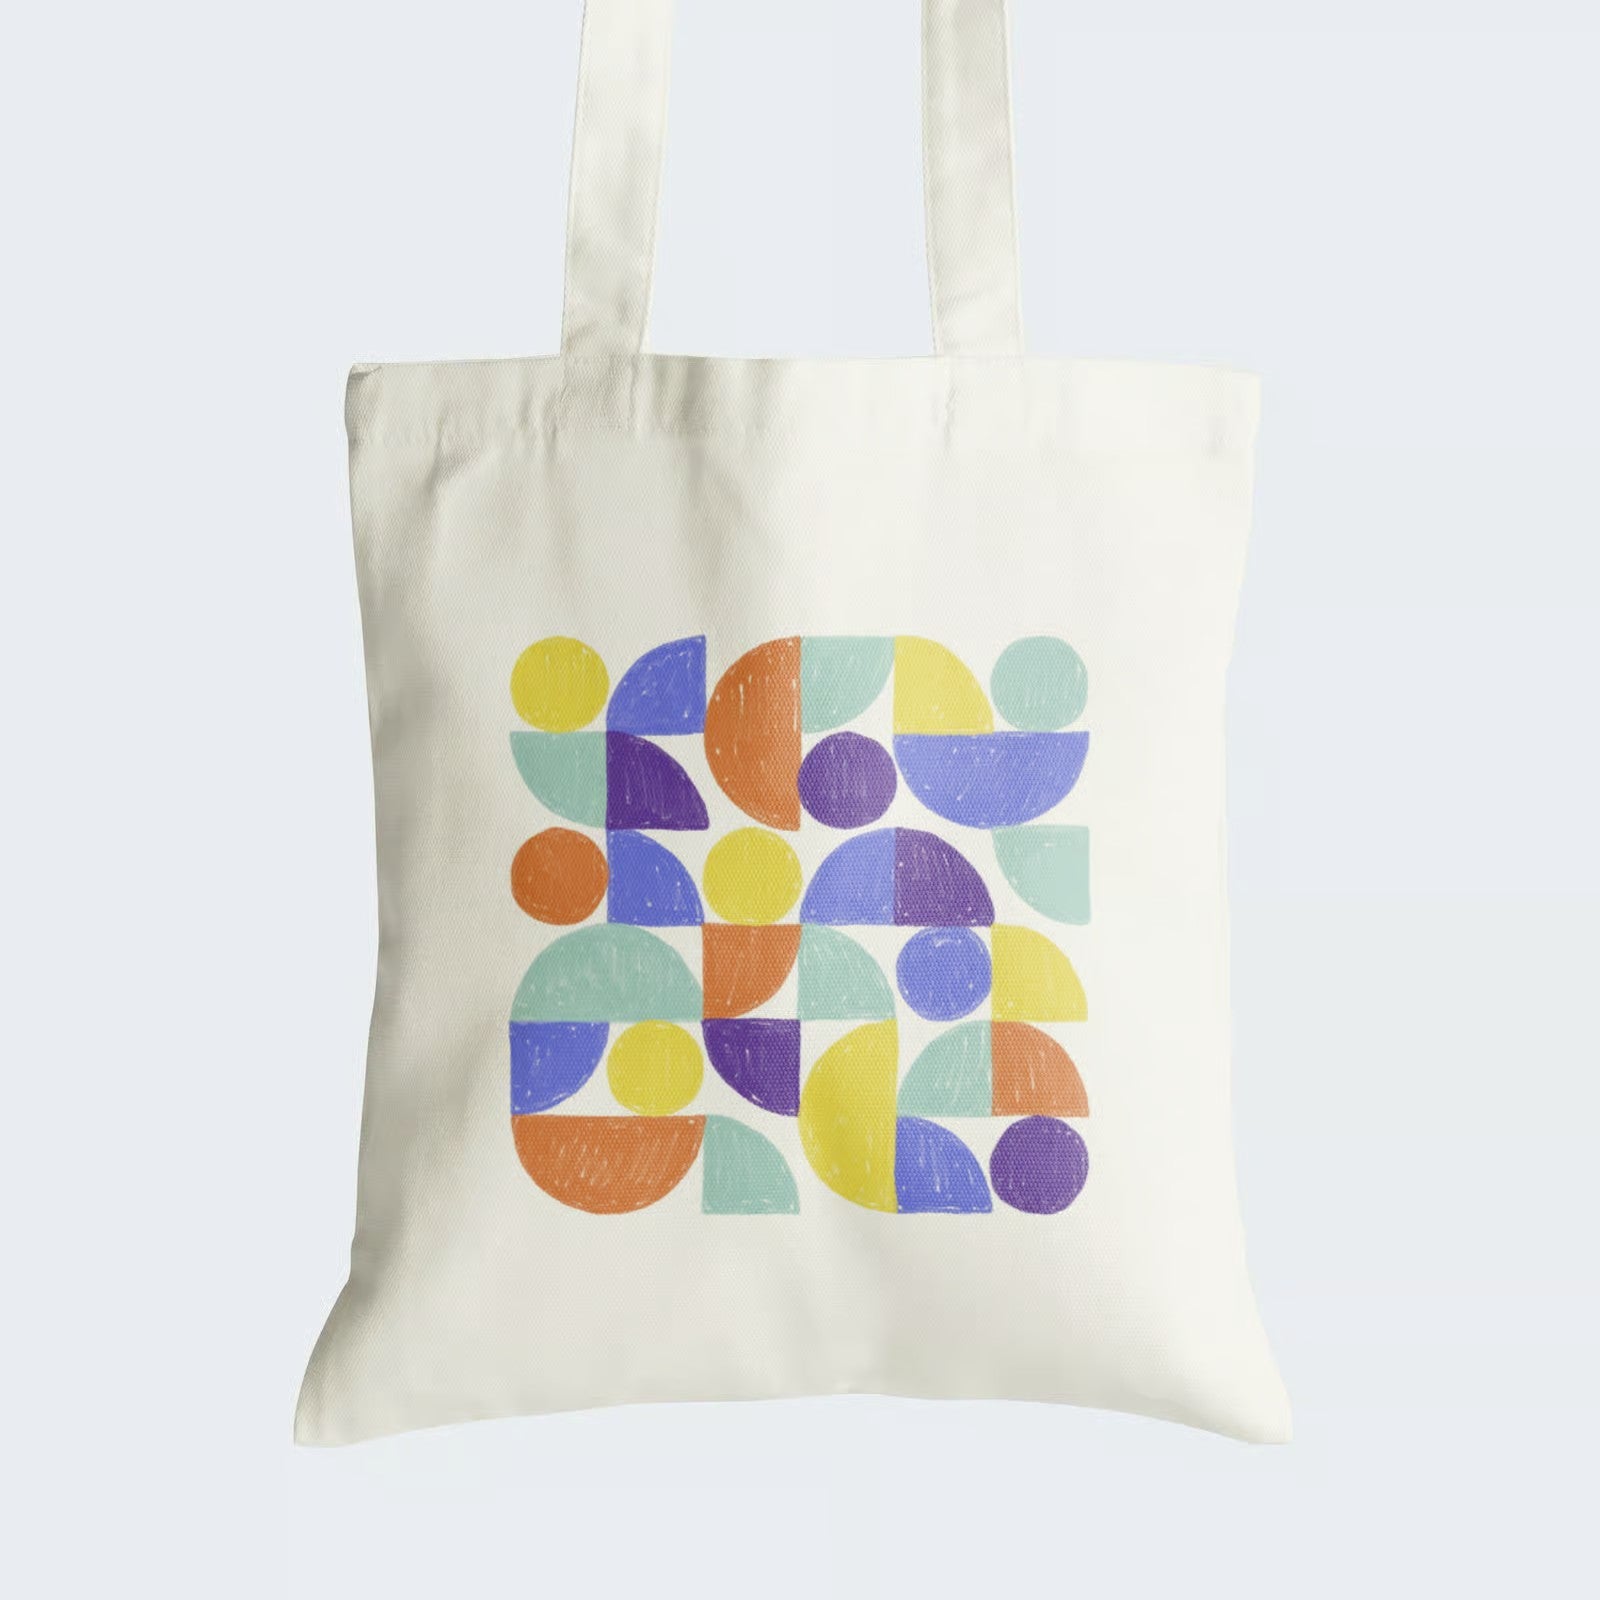 Elevate your style with our "Mosaic Magic" Cotton Canvas Tote Bag, a vibrant work of art. This tote boasts a captivating mosaic design, featuring an array of circular and geometric shapes in striking shades of blue, yellow, green, and orange. Crafted for both durability and style, it includes a secure zipper closure for daily convenience. Carry the allure of mosaic art with our fashionable Cotton Canvas Tote Bag. Order yours today and make a colorful statement!